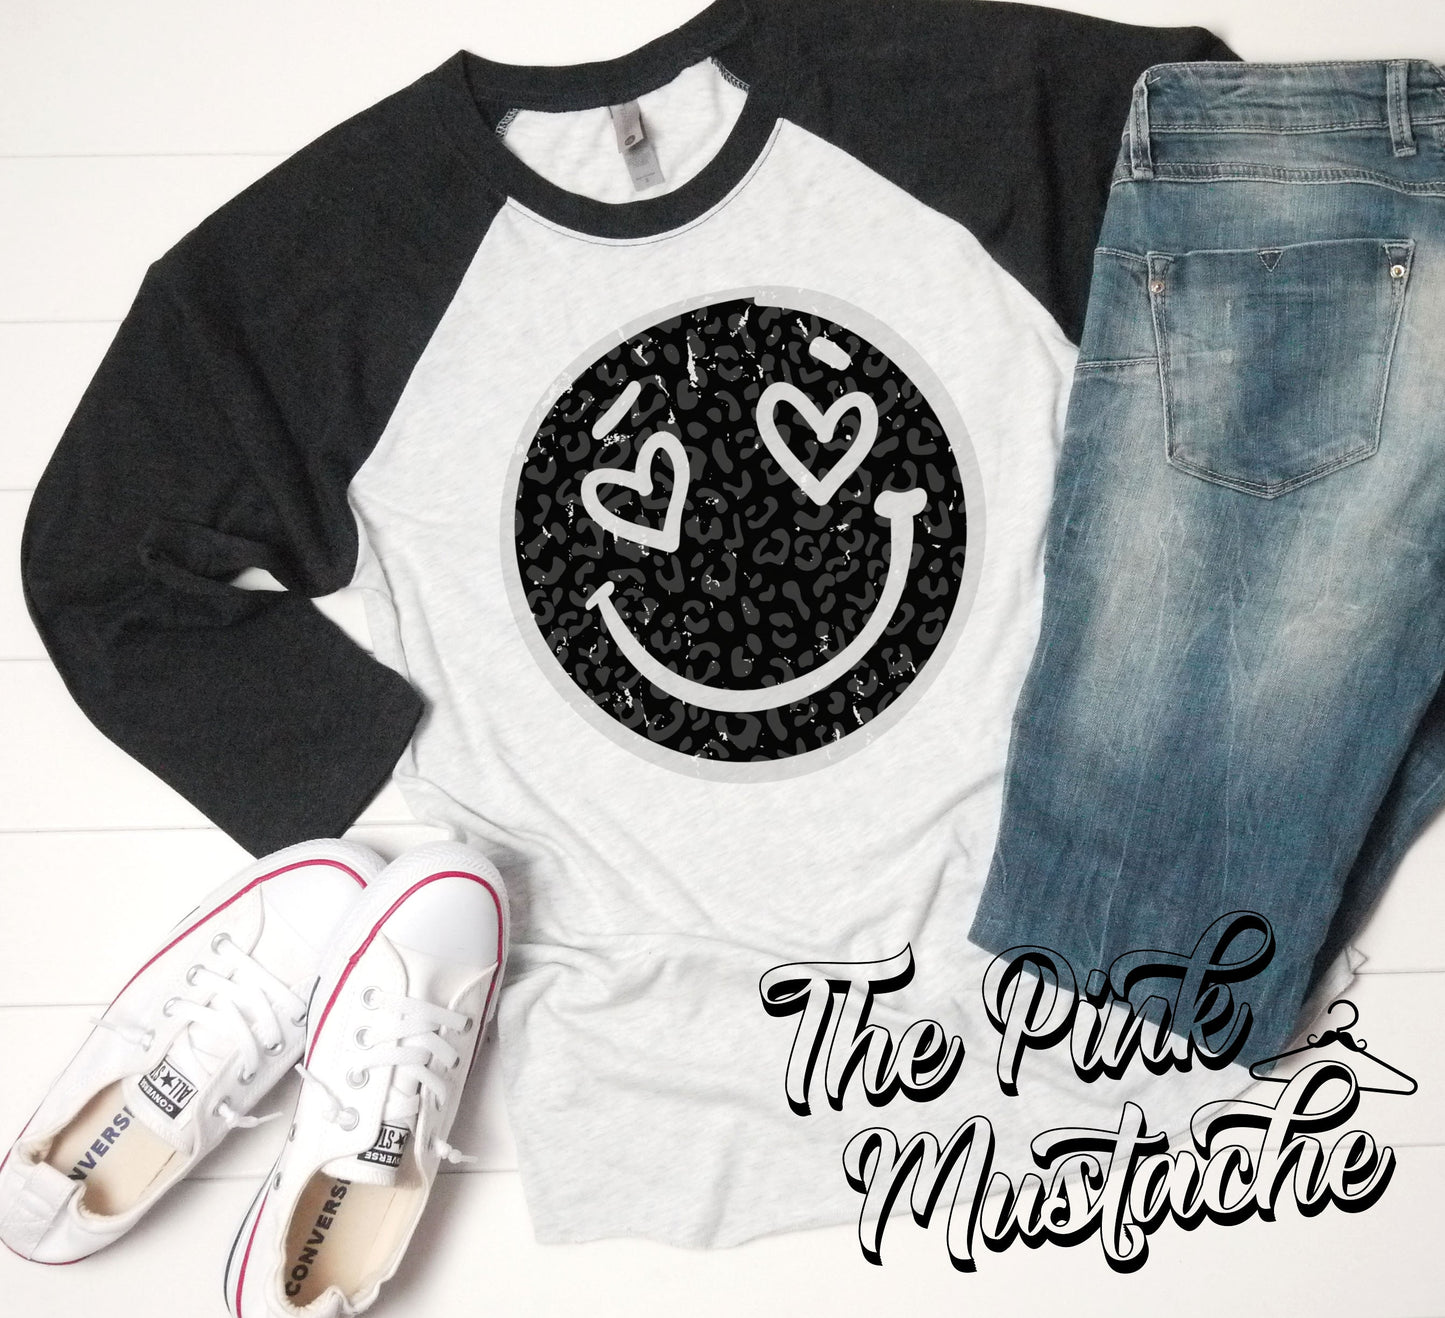 Black Leopard Distressed Smiley Face Raglan/ Super Cute Unisex Sized Shirt/ Youth and Adult Options